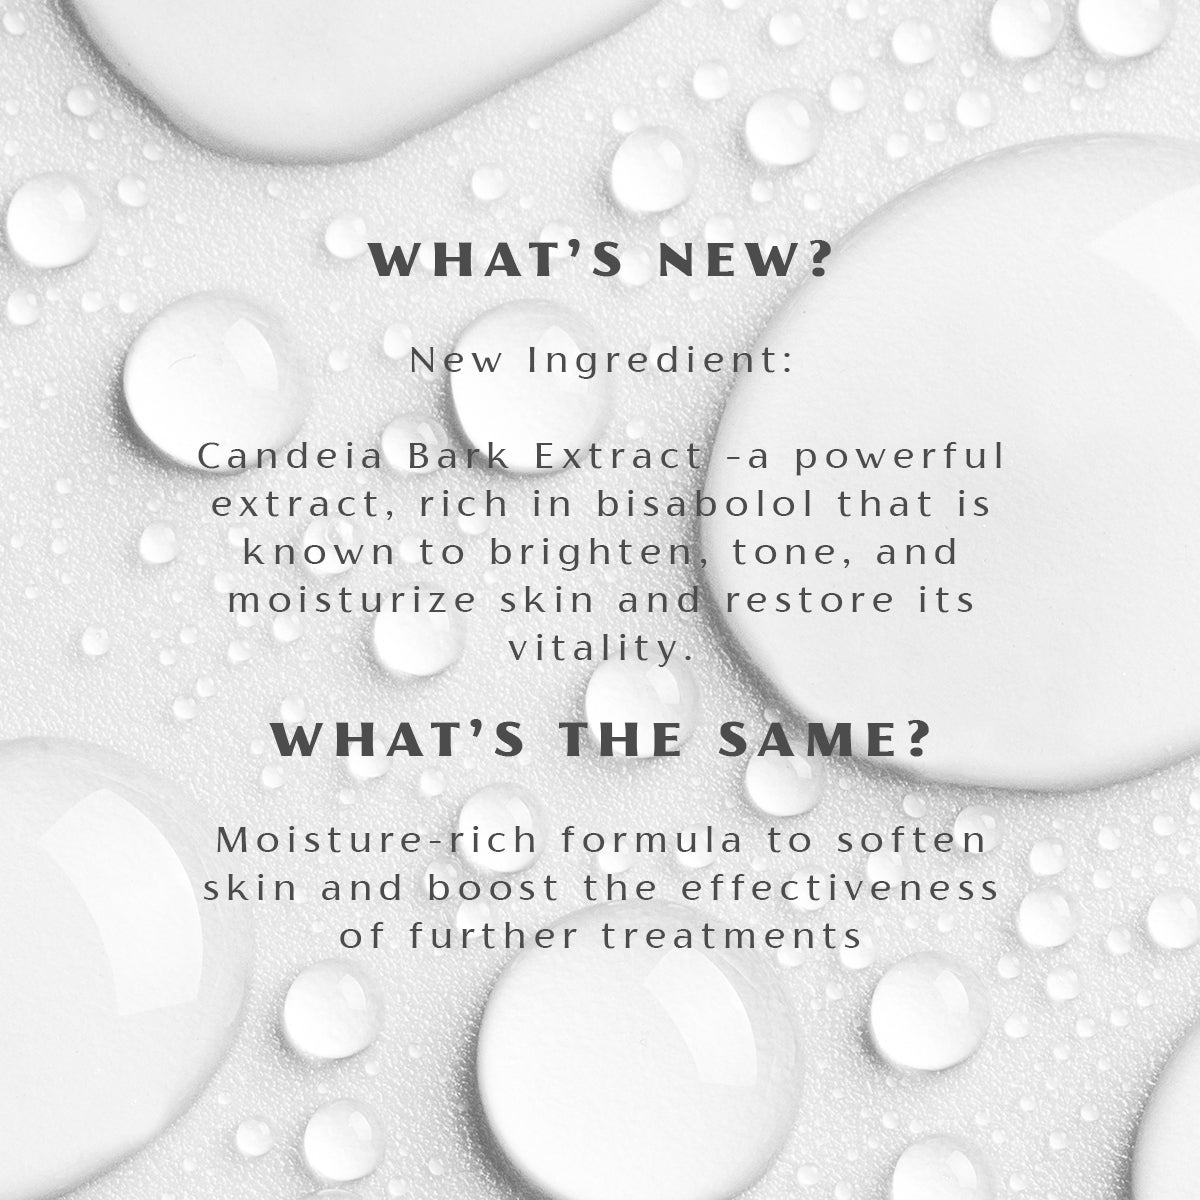 Discover the latest updates and advancements in our line of Bio Damascena Rose Otto Facial Toner from Alteya Organics. Stay updated on what's new and exciting as we continuously hydrate and clarify your skin with our exceptional products.